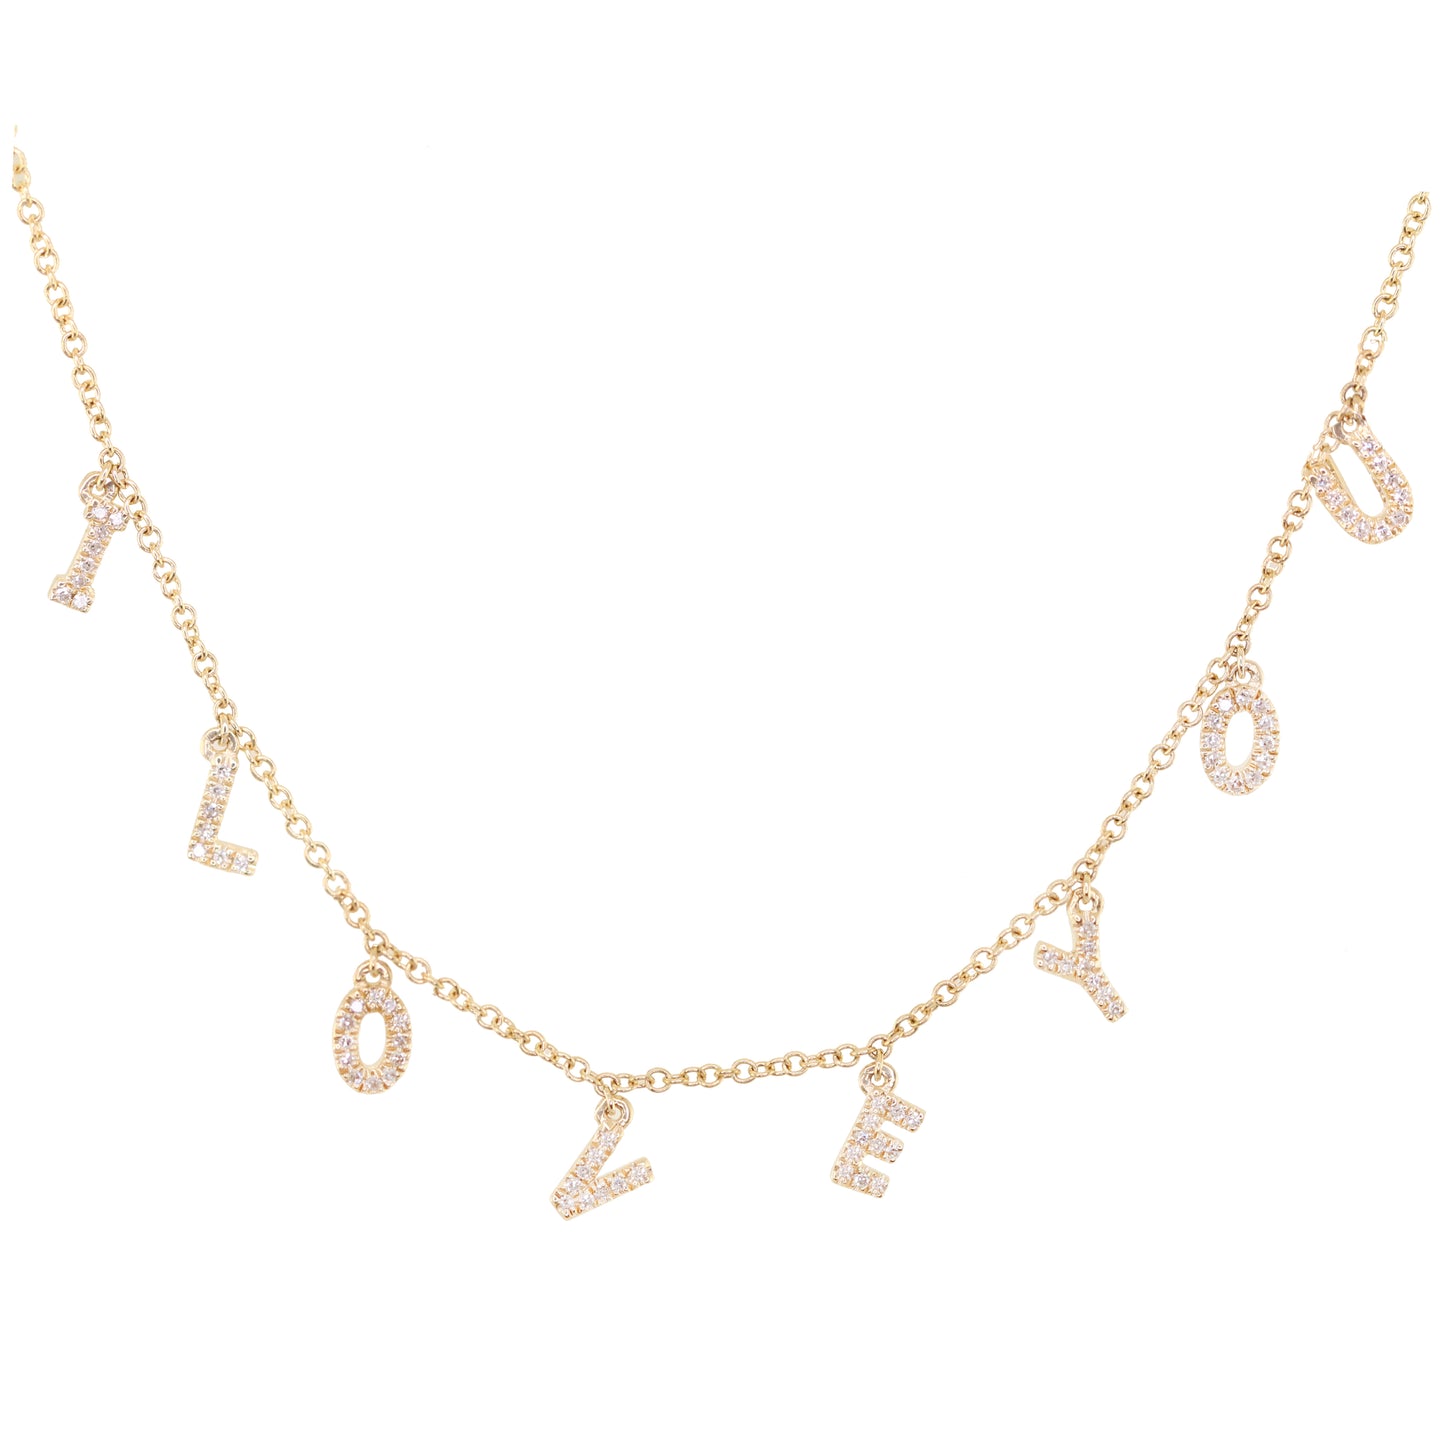 14kt yellow gold and diamond I Love You necklace - Luna Skye